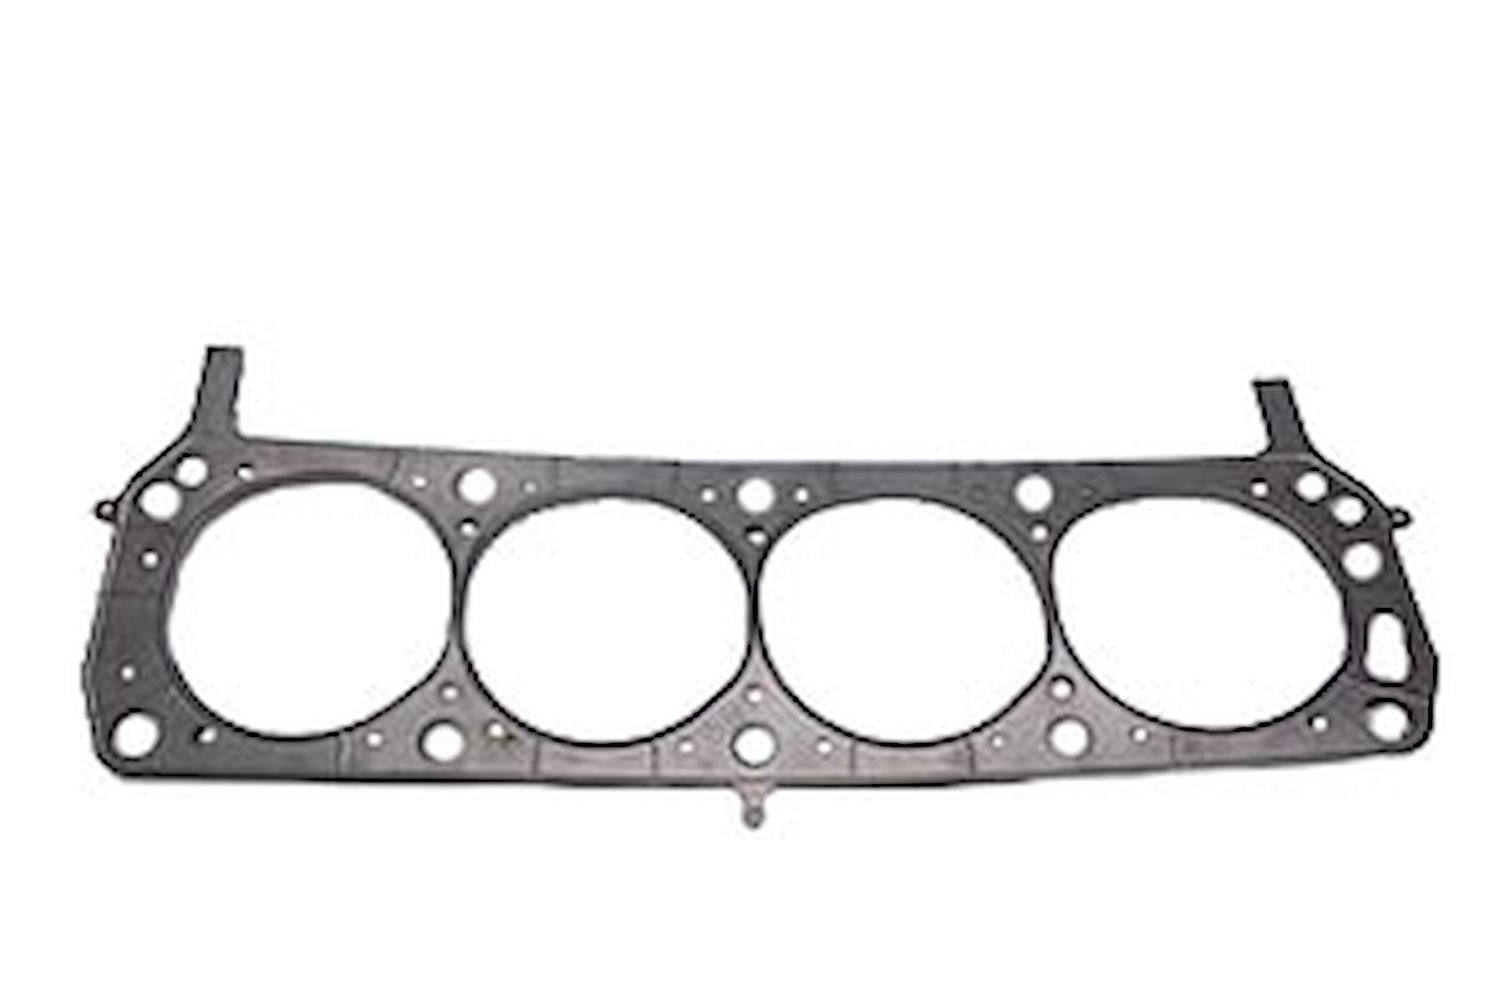 Small-Block Ford Head Gasket 302, 351 SVO Round